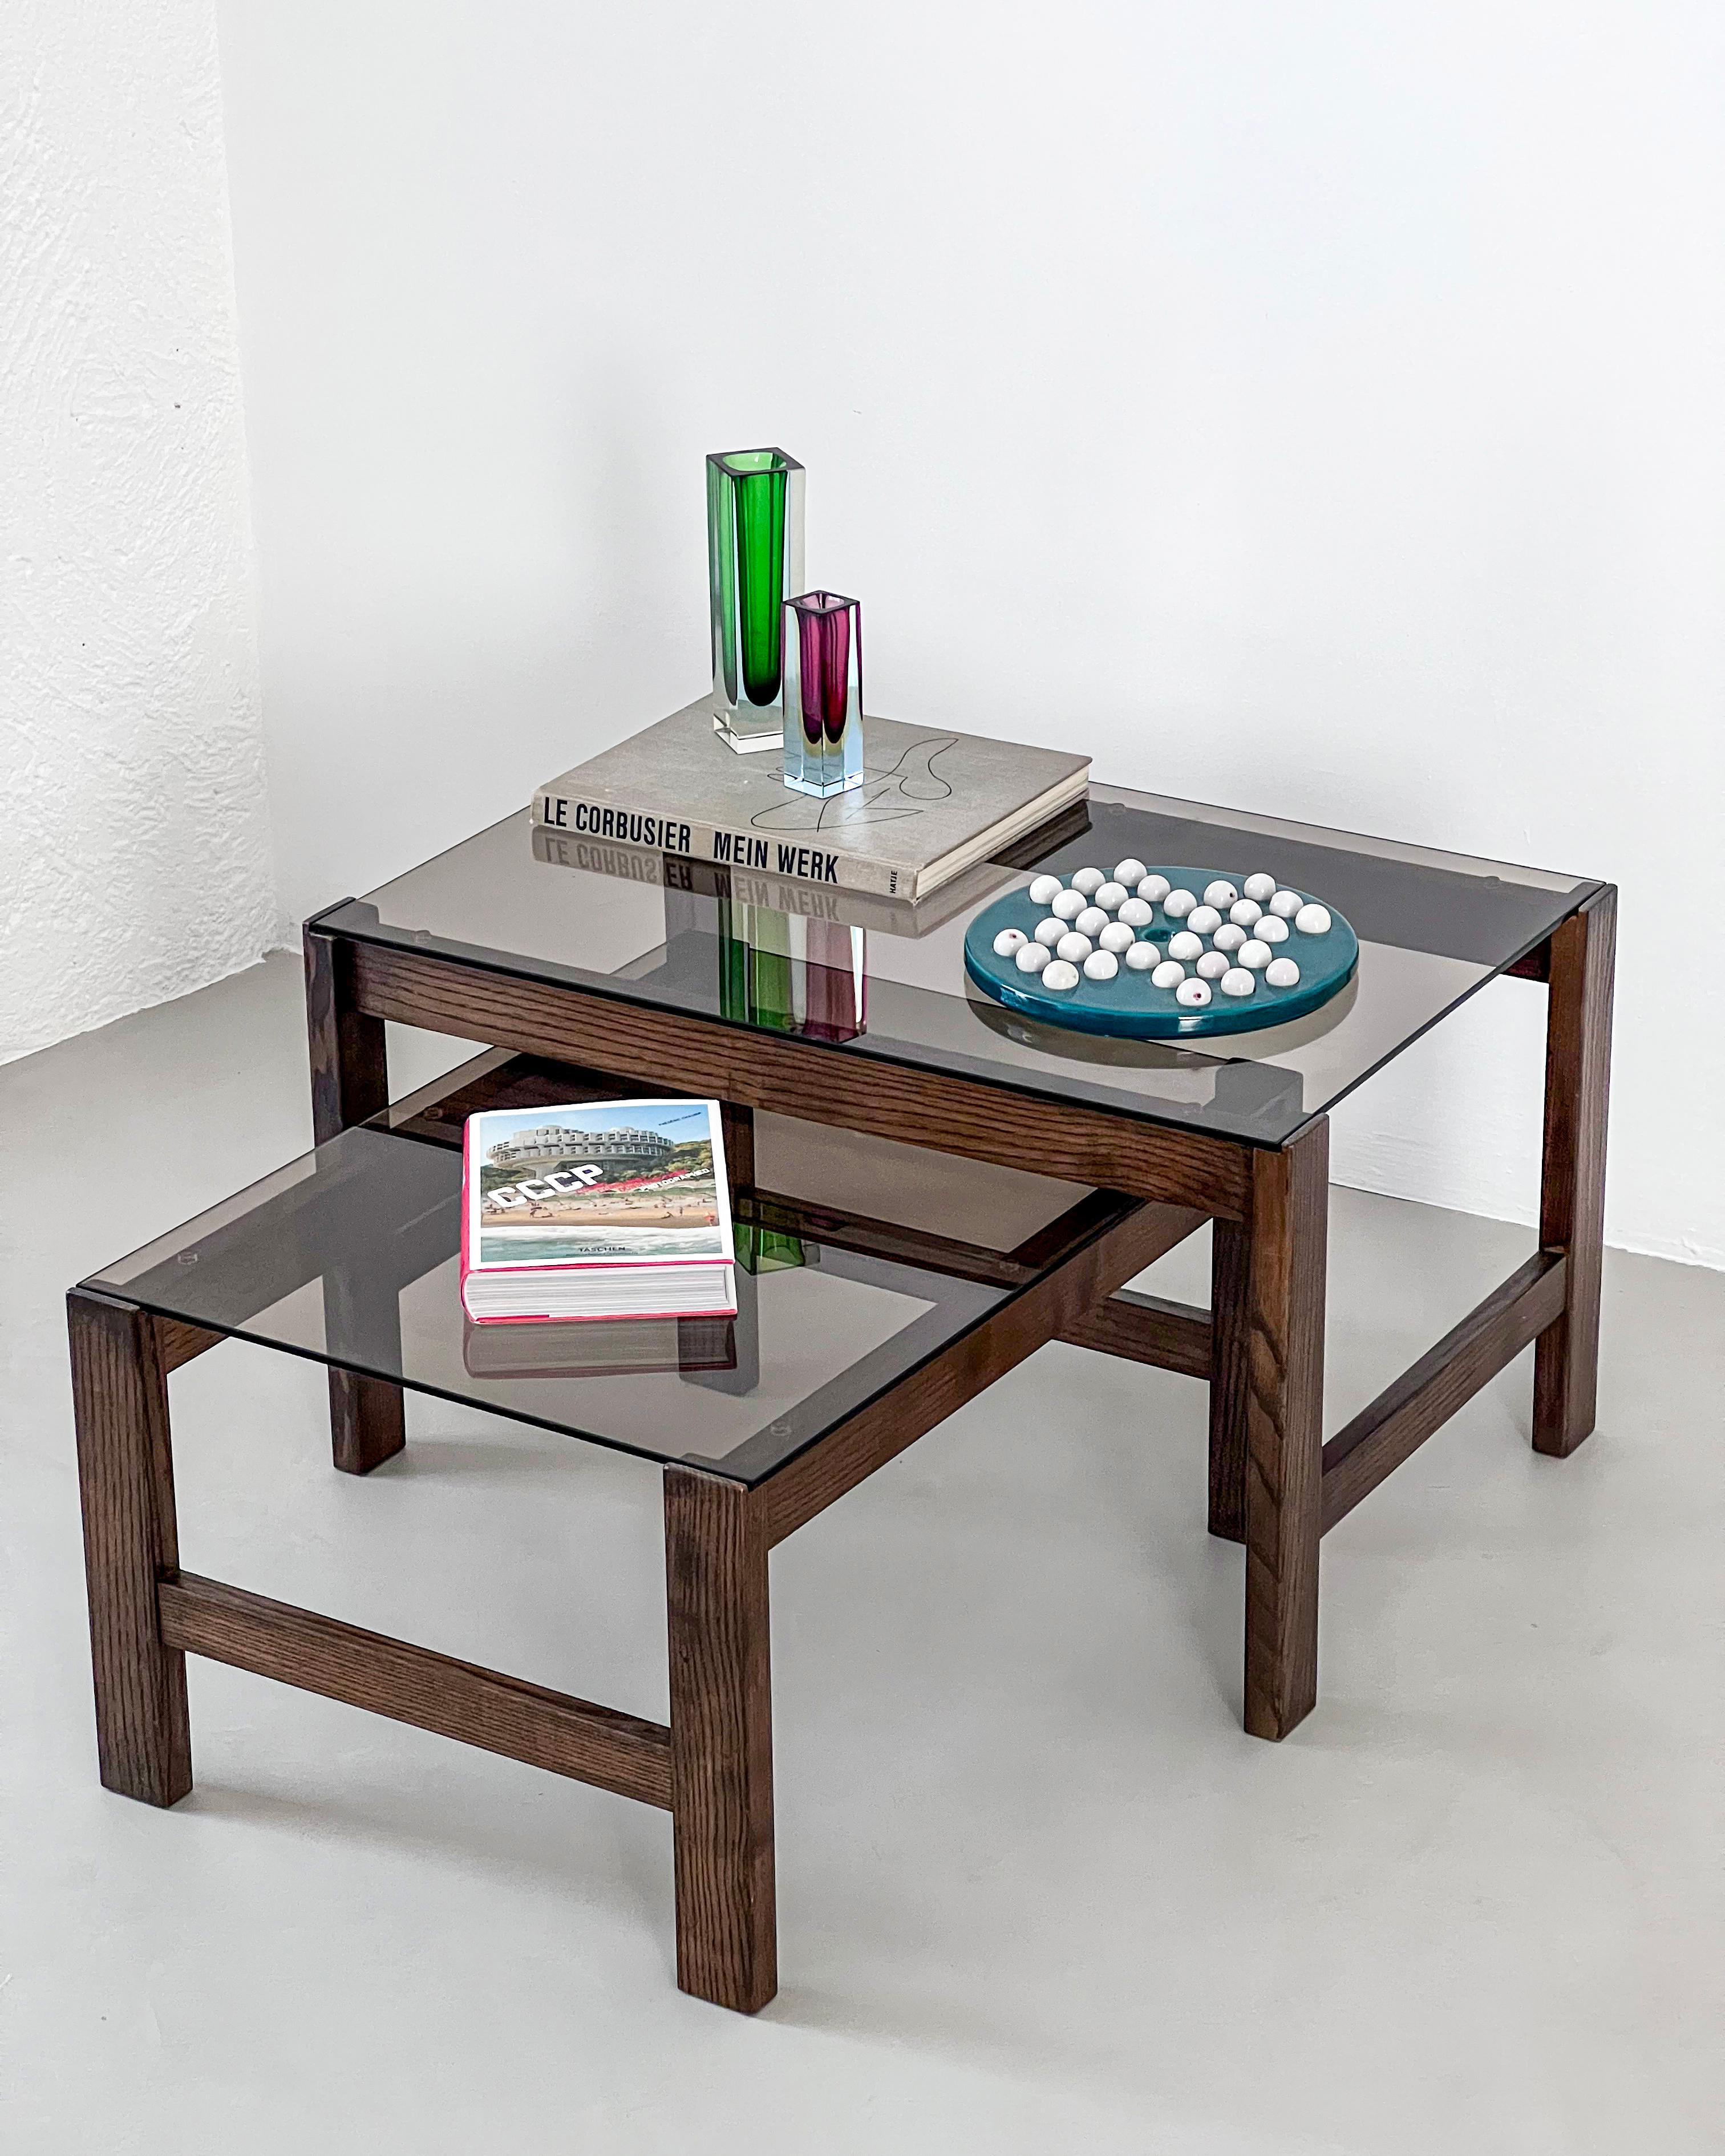 Mid-Century Modern Nesting Coffee Tables, Wood and Glass, Living Room Decorative In Good Condition For Sale In Milano, IT